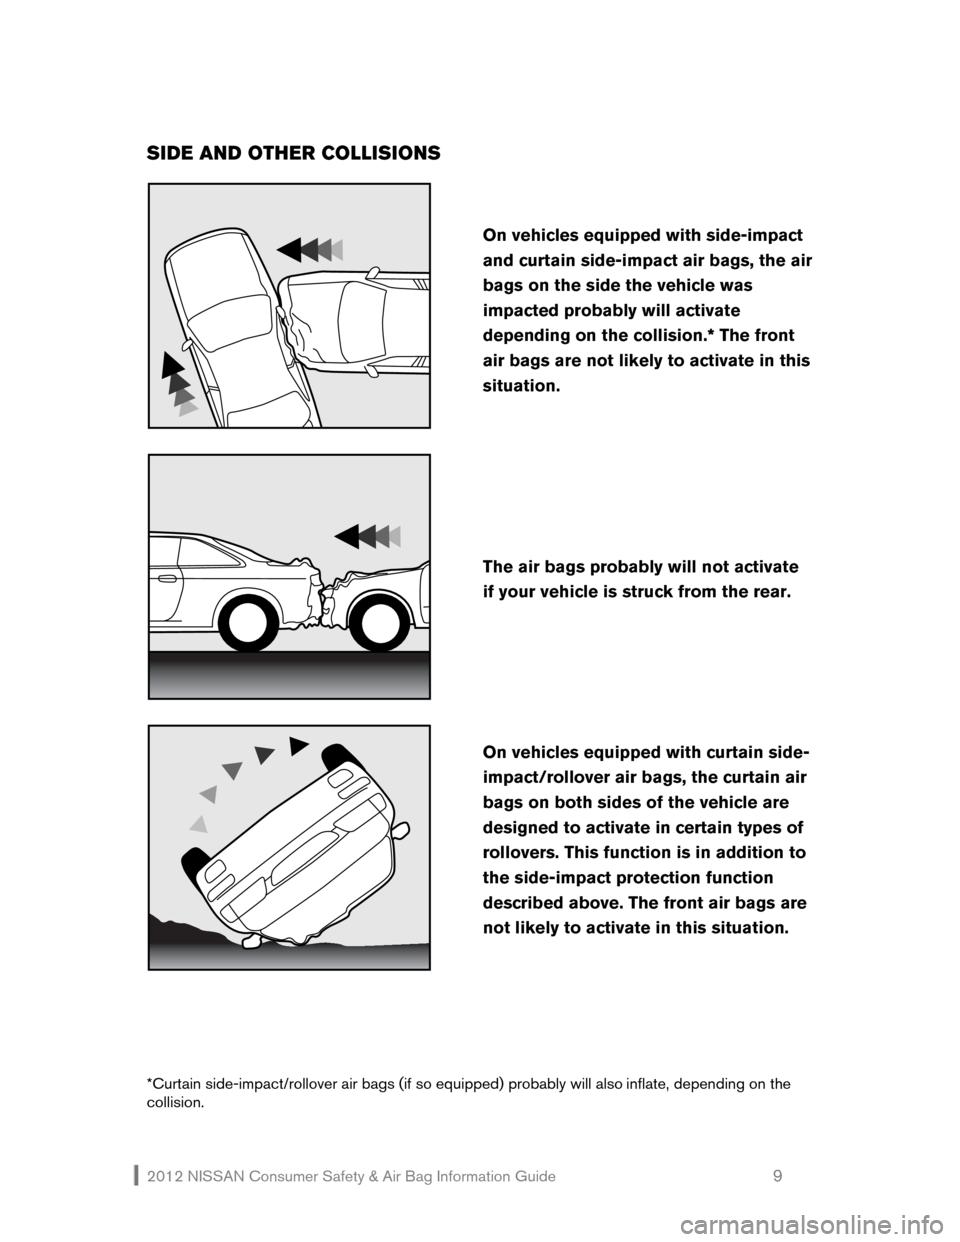 NISSAN XTERRA 2012 N50 / 2.G Consumer Safety Air Bag Information Guide 2012 NISSAN Consumer Safety & Air Bag Information Guide                                                   9 
SIDE AND OTHER COLLISIONS 
 
 
 
 
 
*Curtain side-impact/rollover air bags (if so equipped